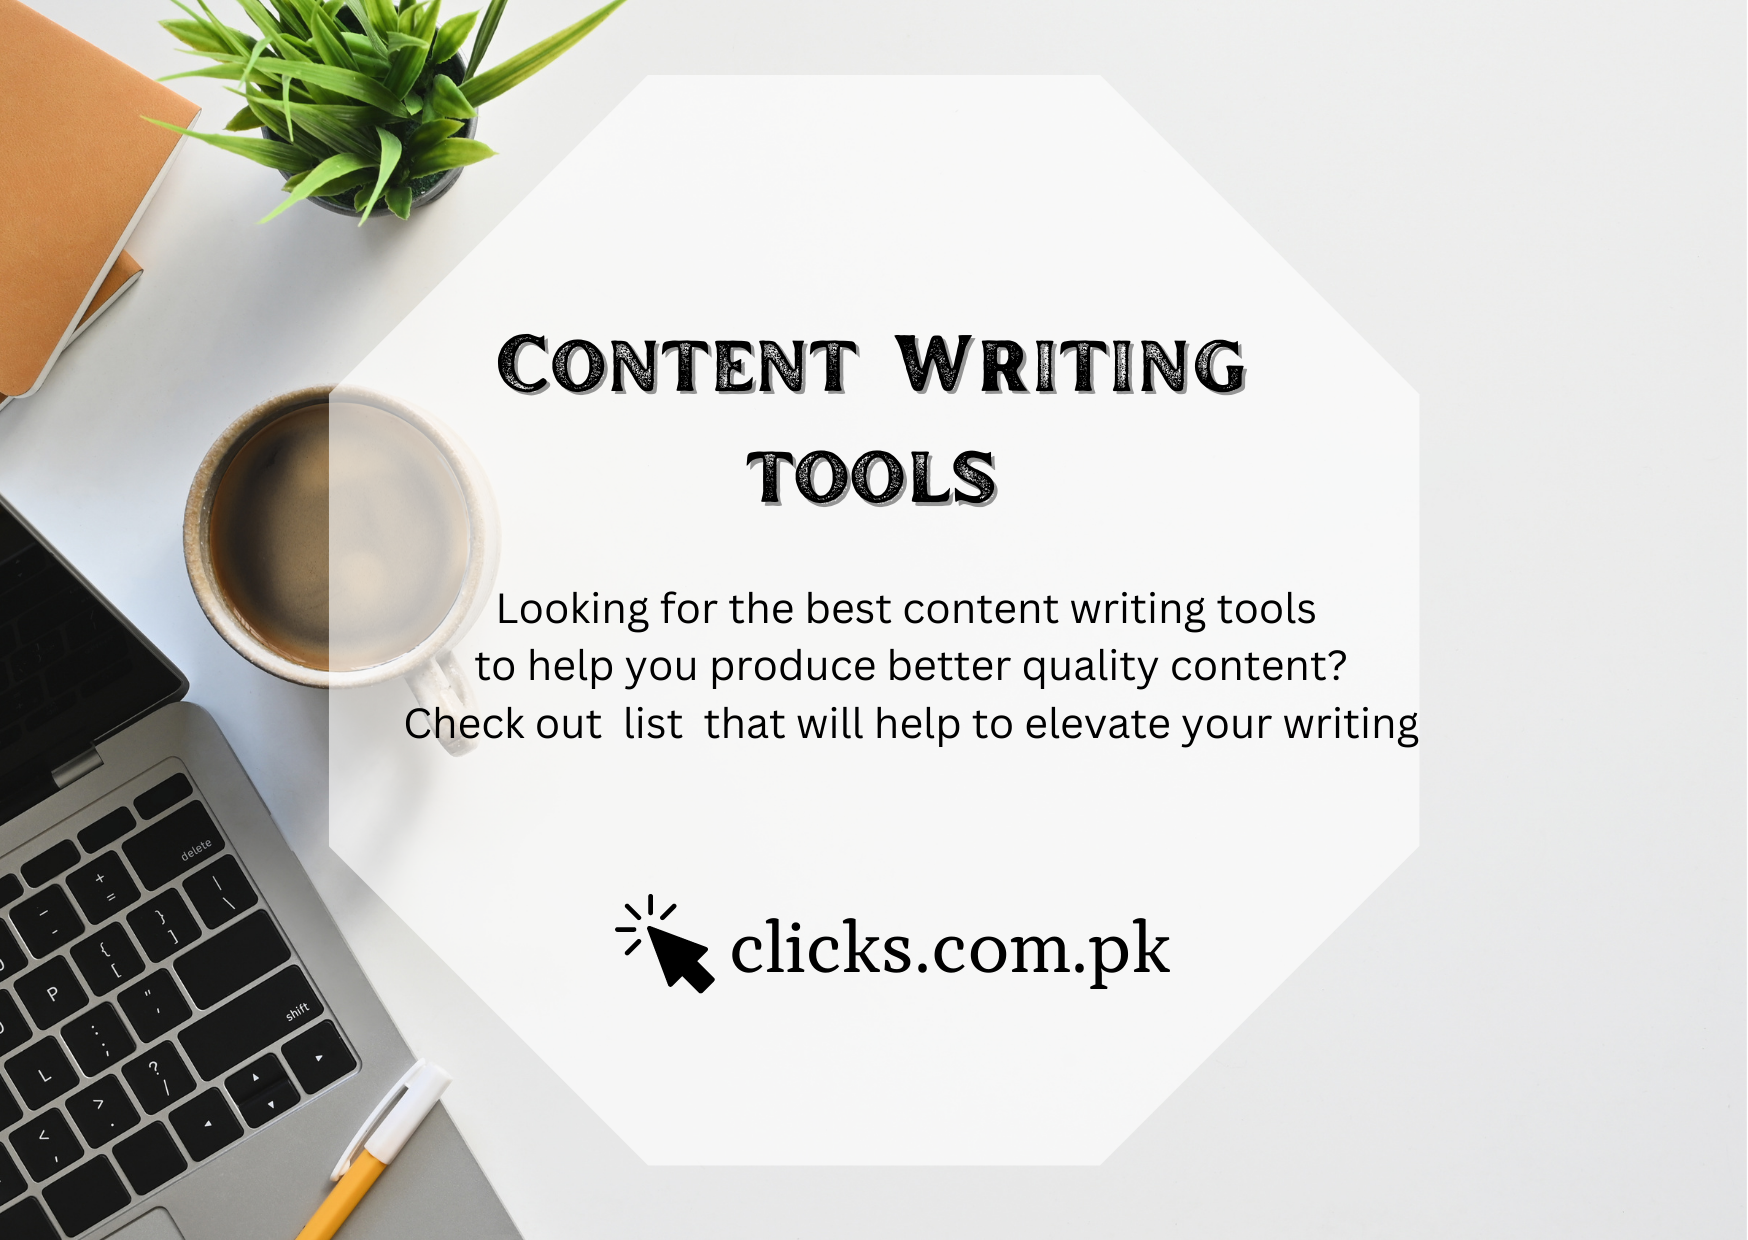 CONTENT WRITING TOOLS